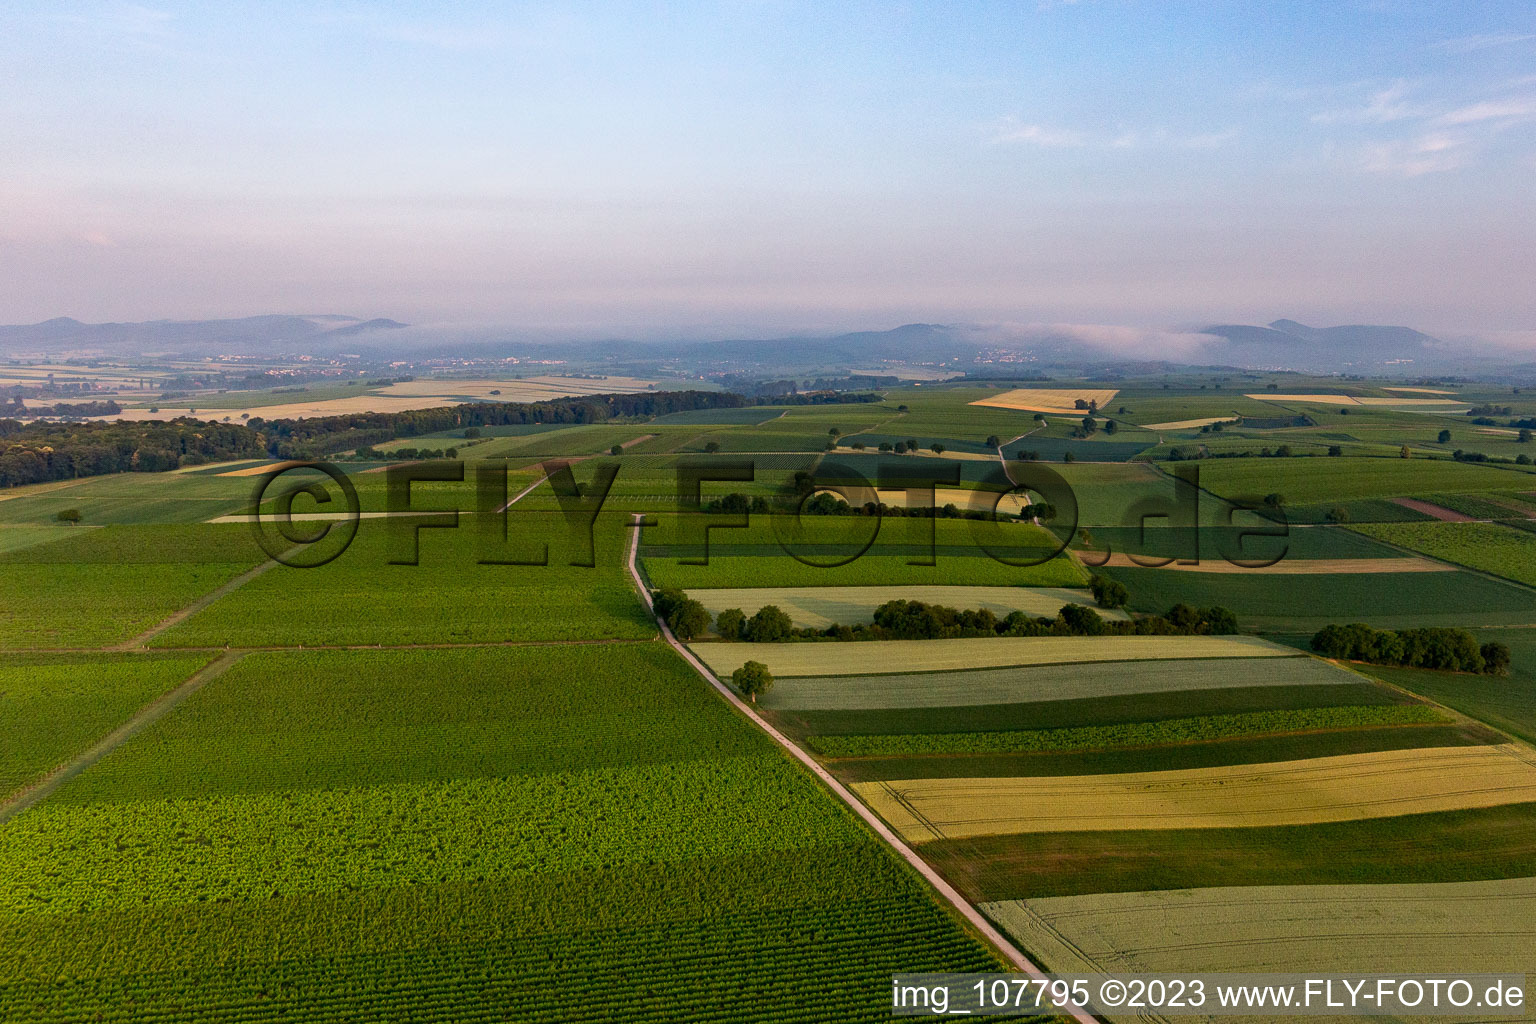 Winden in the state Rhineland-Palatinate, Germany from a drone